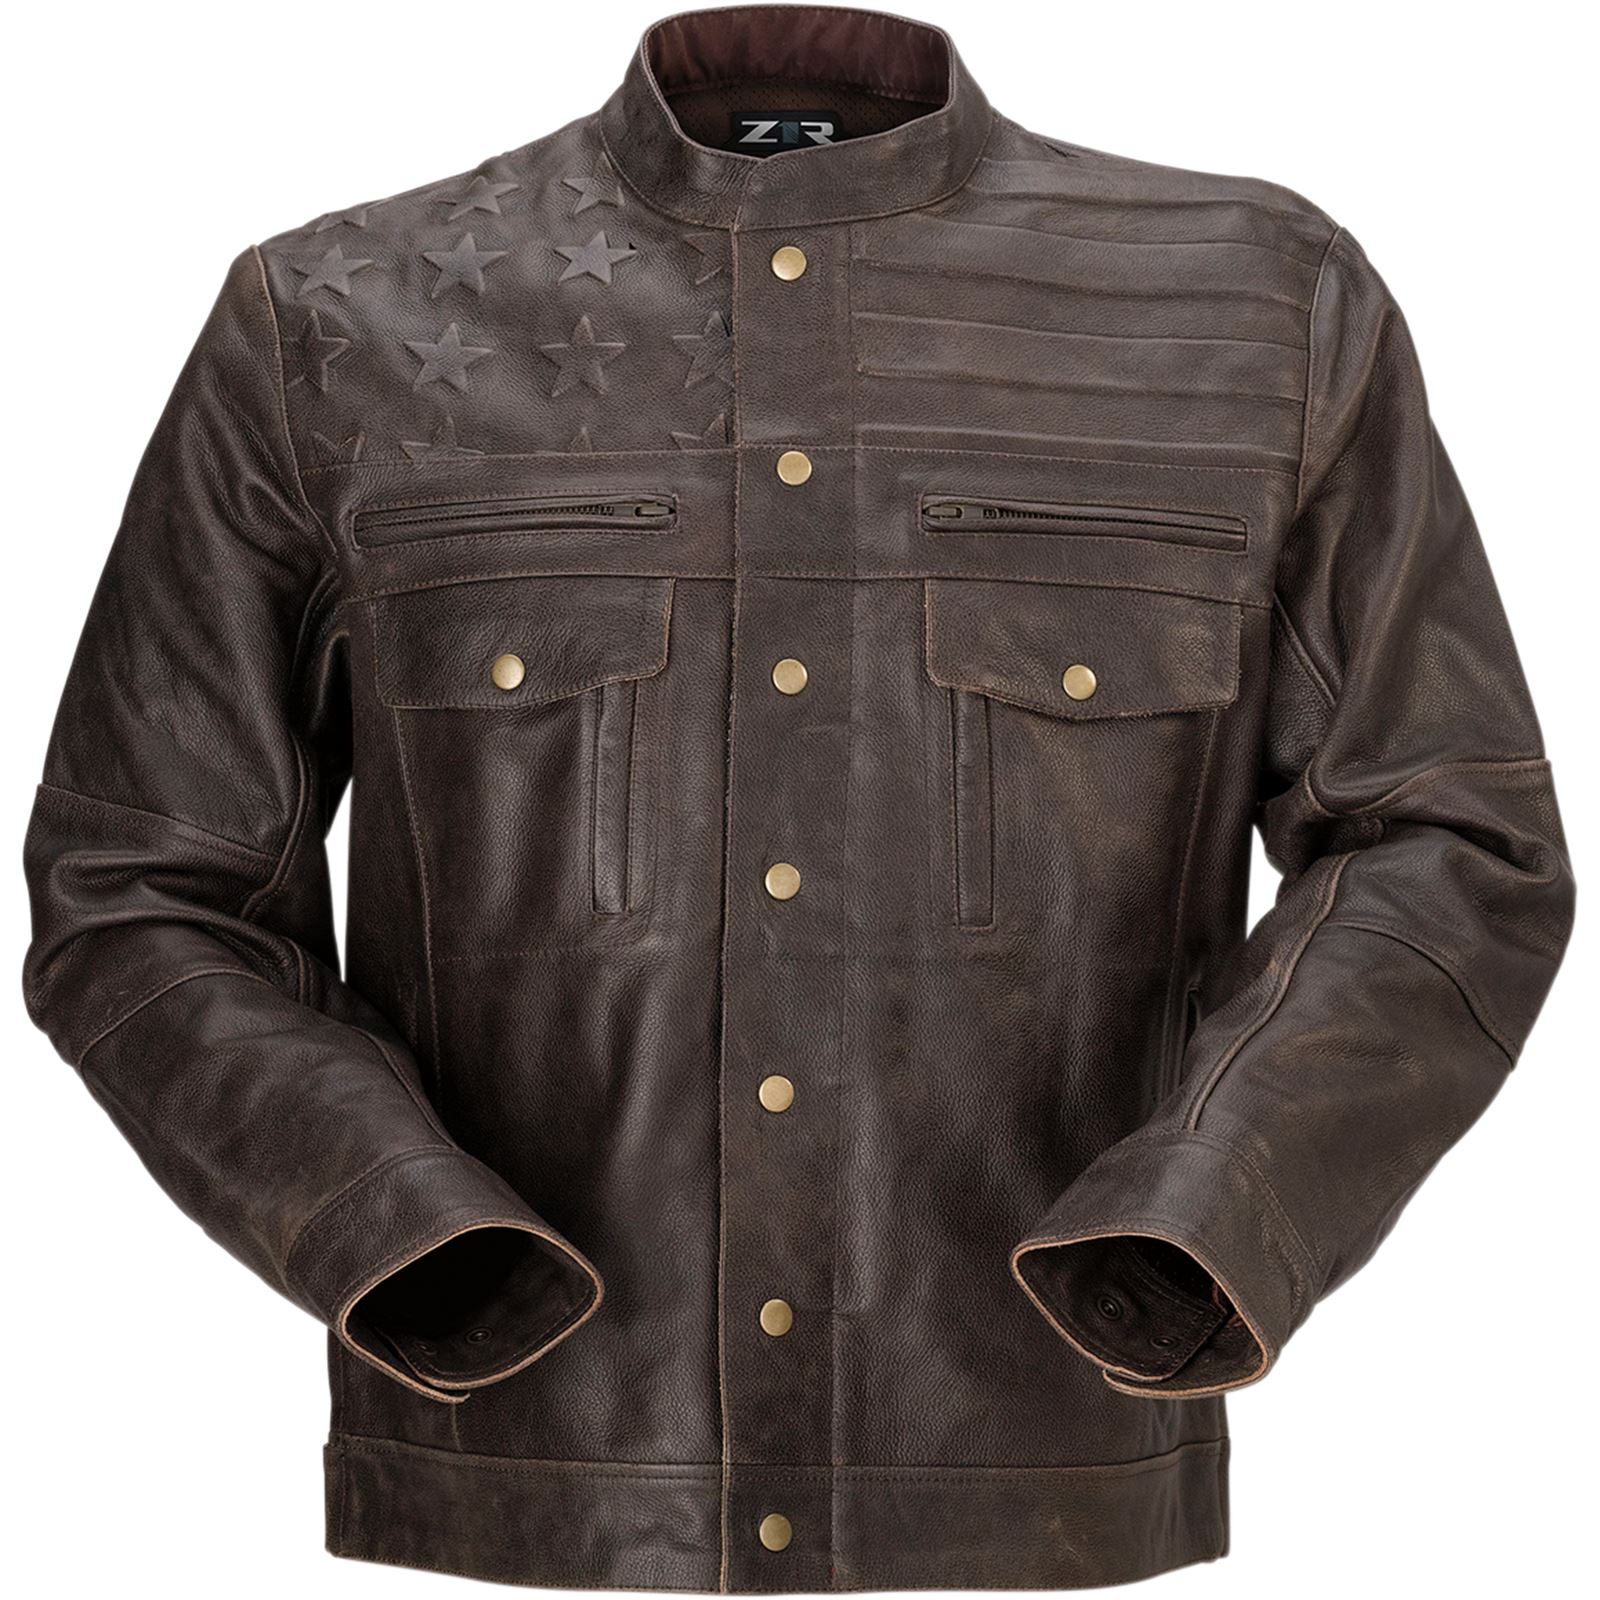 Z1R Deagle Leather Jacket - Brown - Small